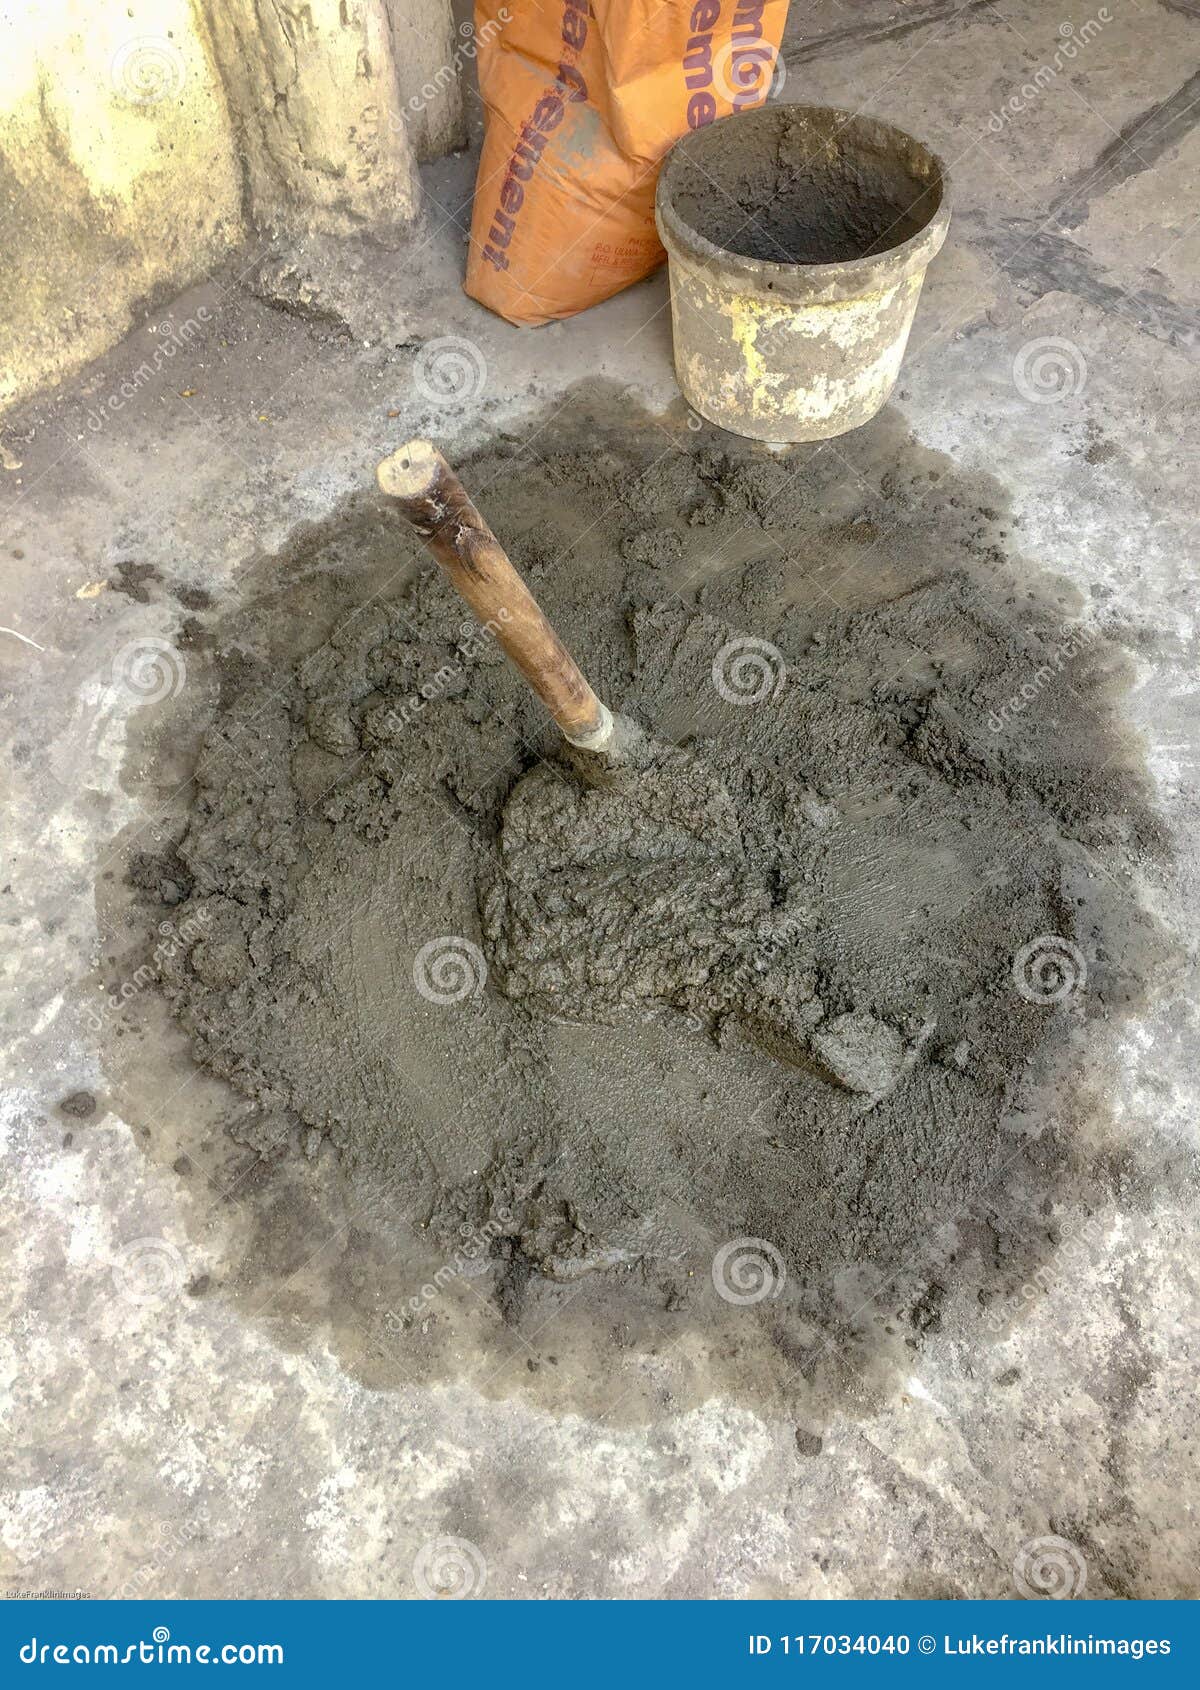 Wet Cement Mix for Construction Work Stock Photo - Image of jobs, concrete:  117034040